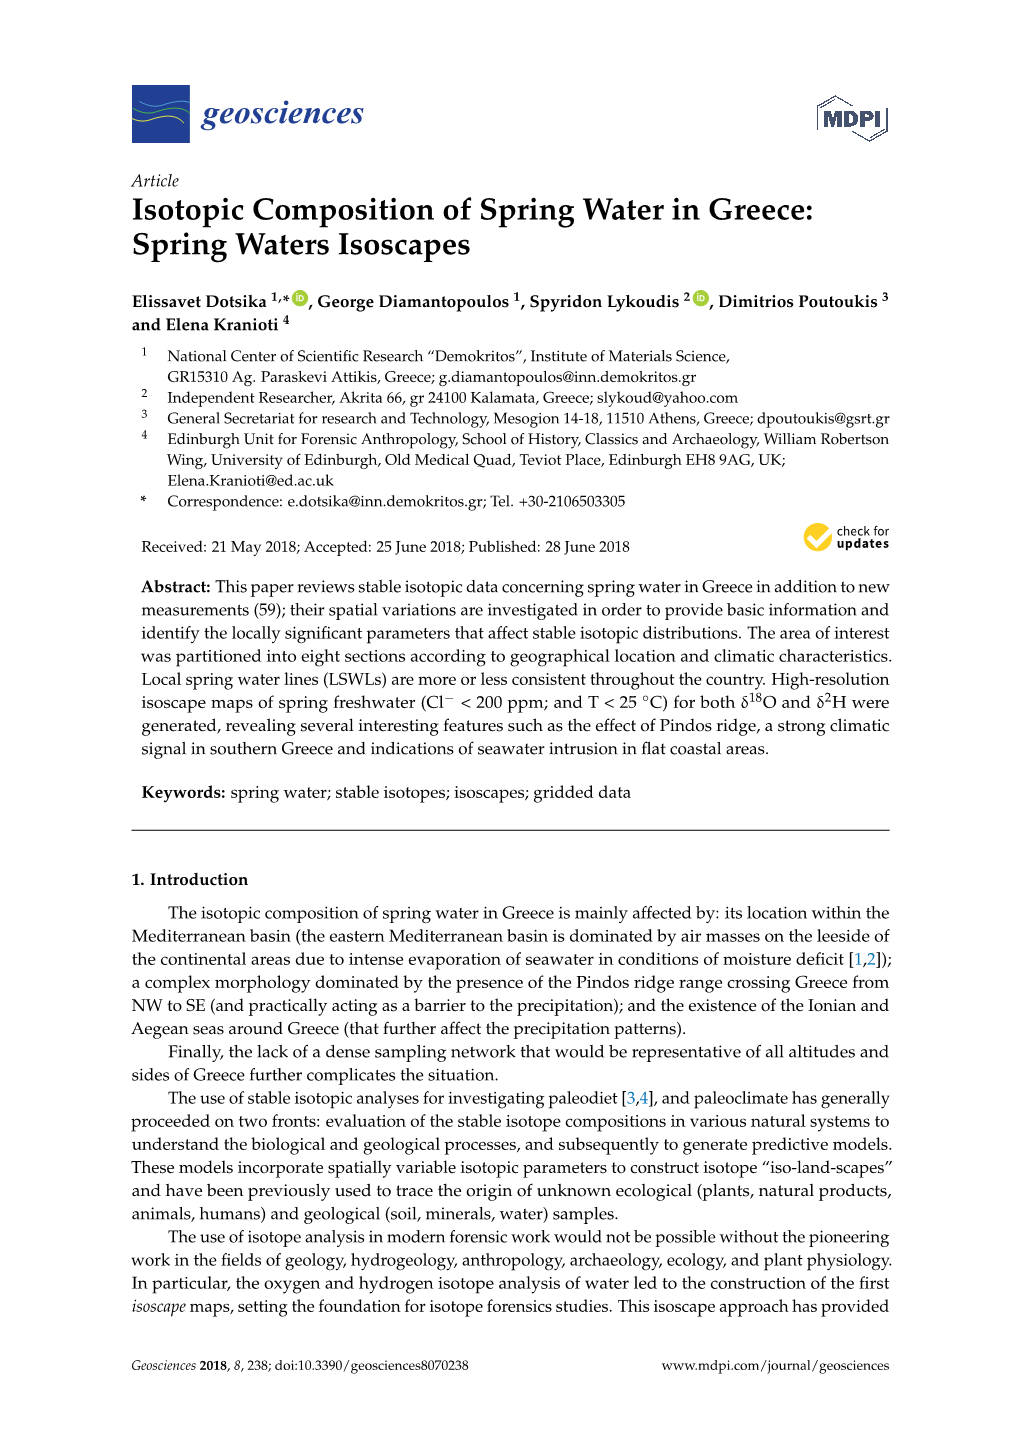 Isotopic Composition of Spring Water in Greece: Spring Waters Isoscapes